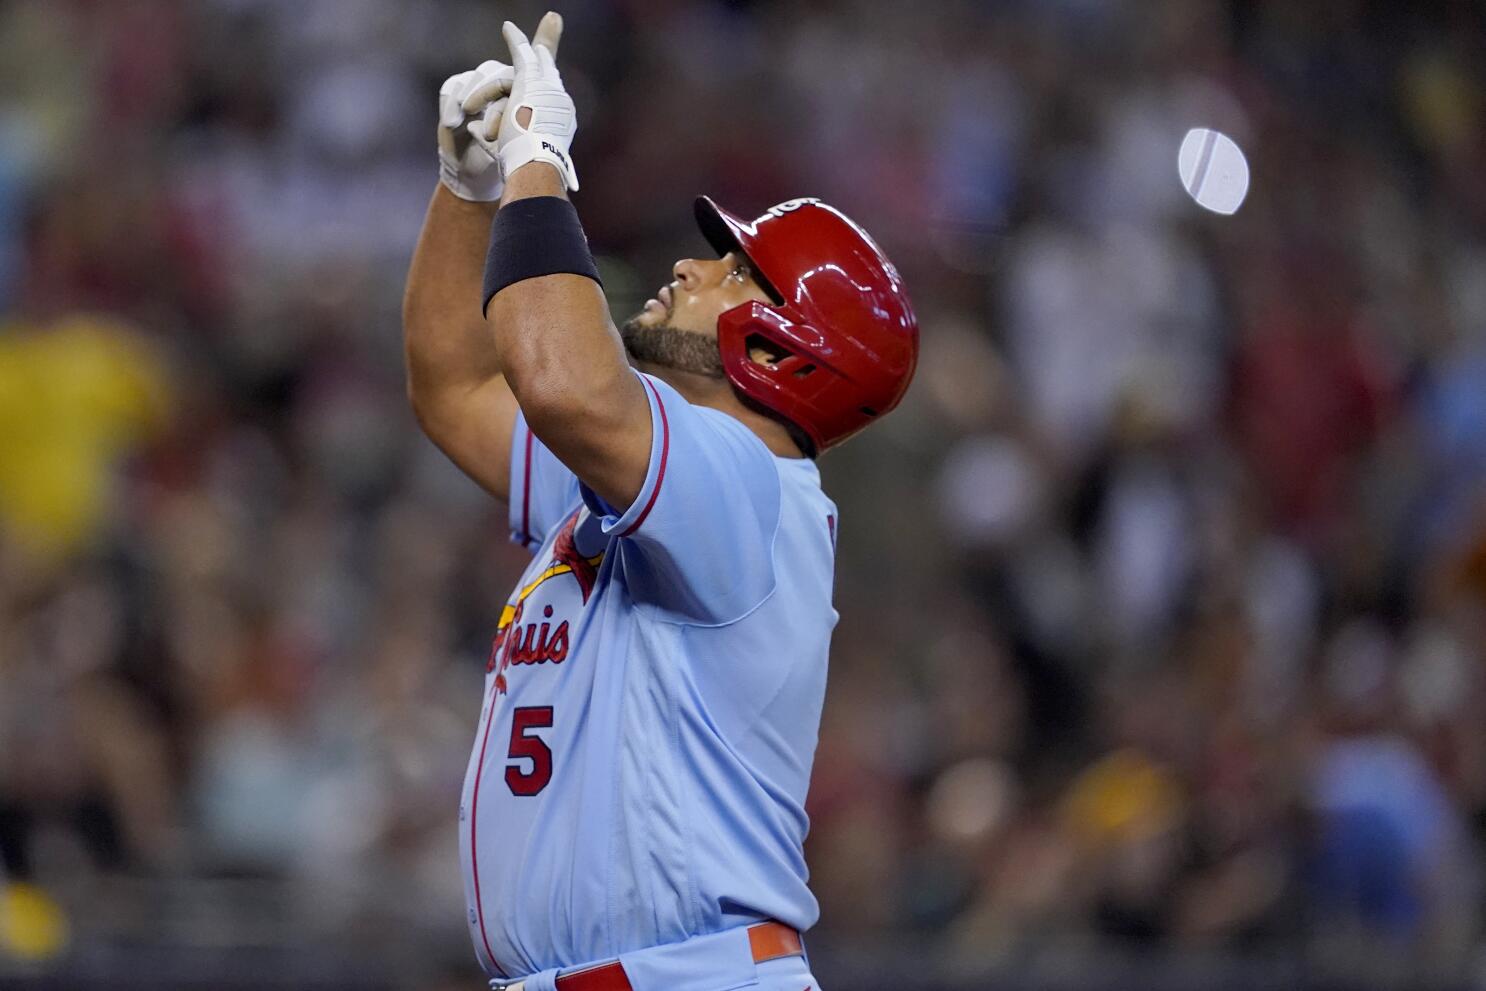 Pujols homers twice, lifts career total to 692 in Cards' win - The San  Diego Union-Tribune